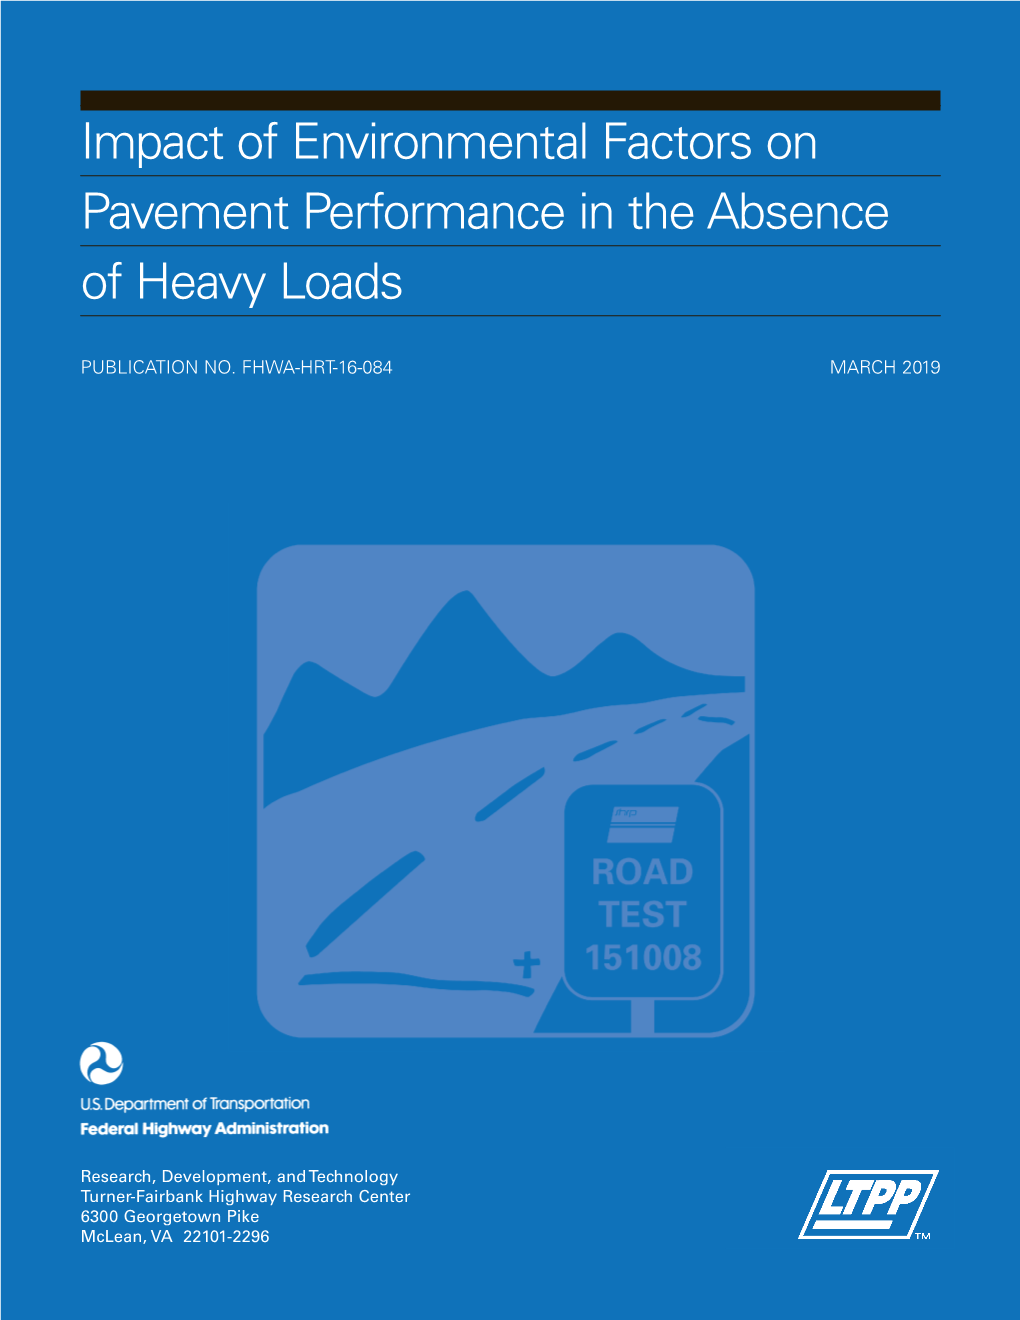 Impact of Environmental Factors on Pavement Performance in the Absence of Heavy Loads